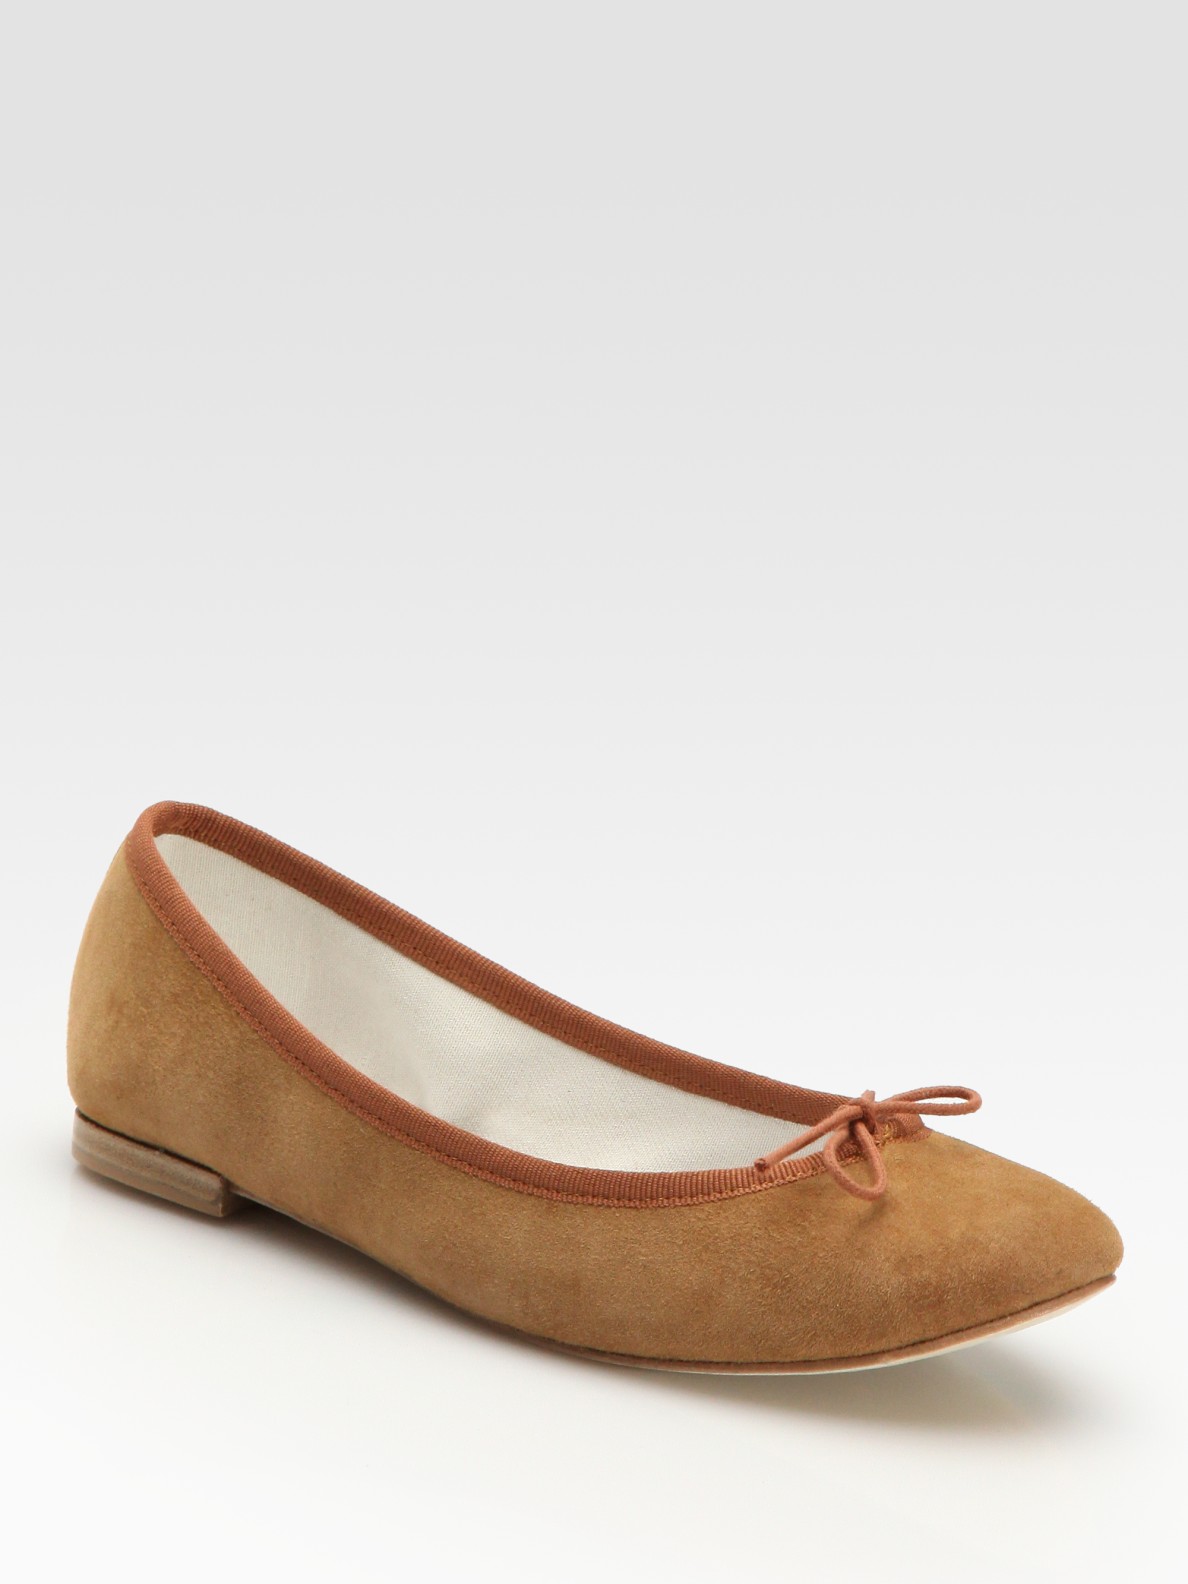 Repetto Suede Ballet Flats in Brown (camel) | Lyst